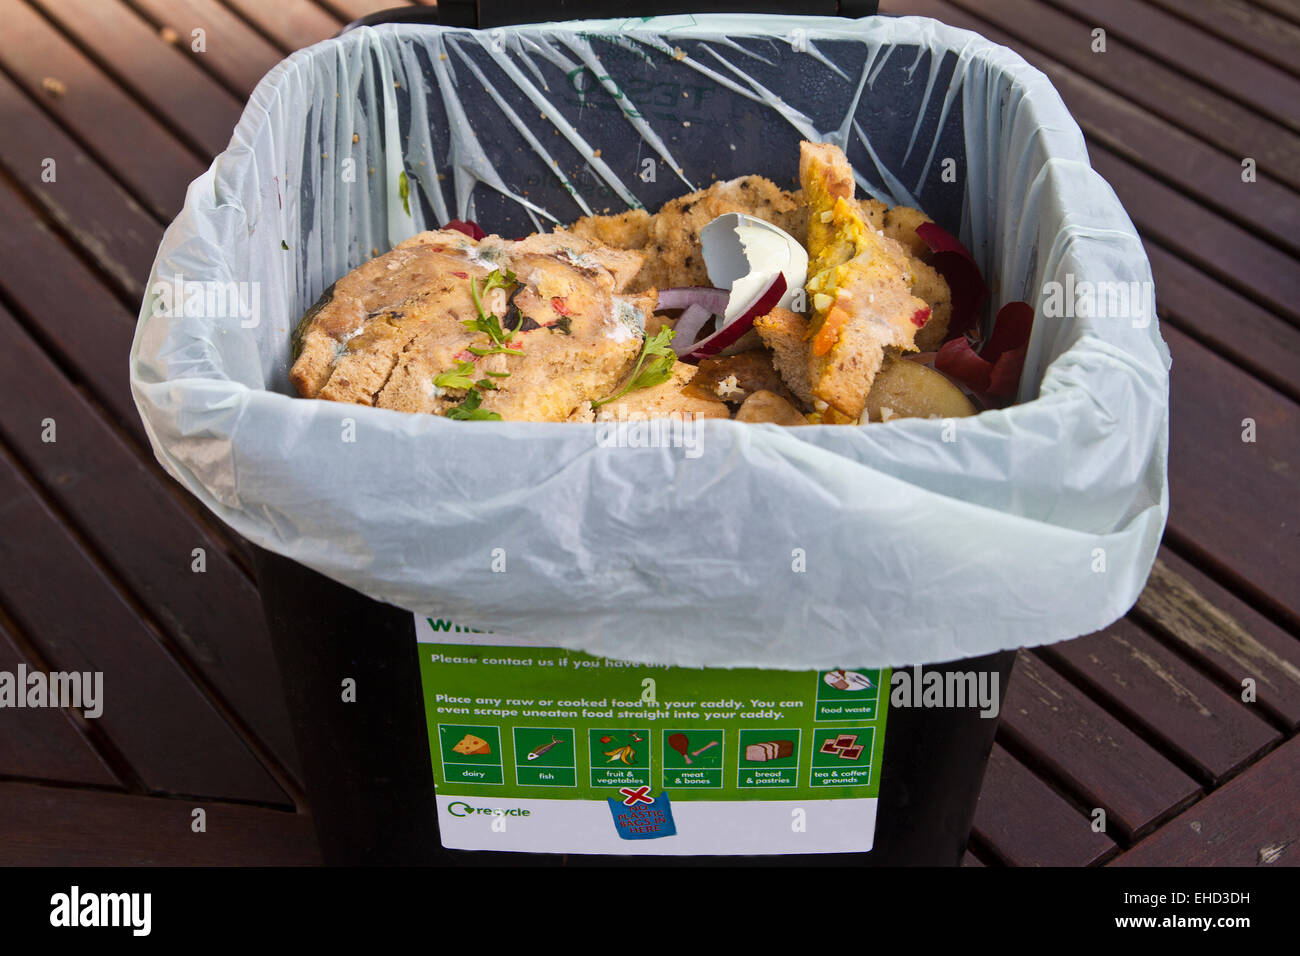 food waste in recycling caddy Stock Photo